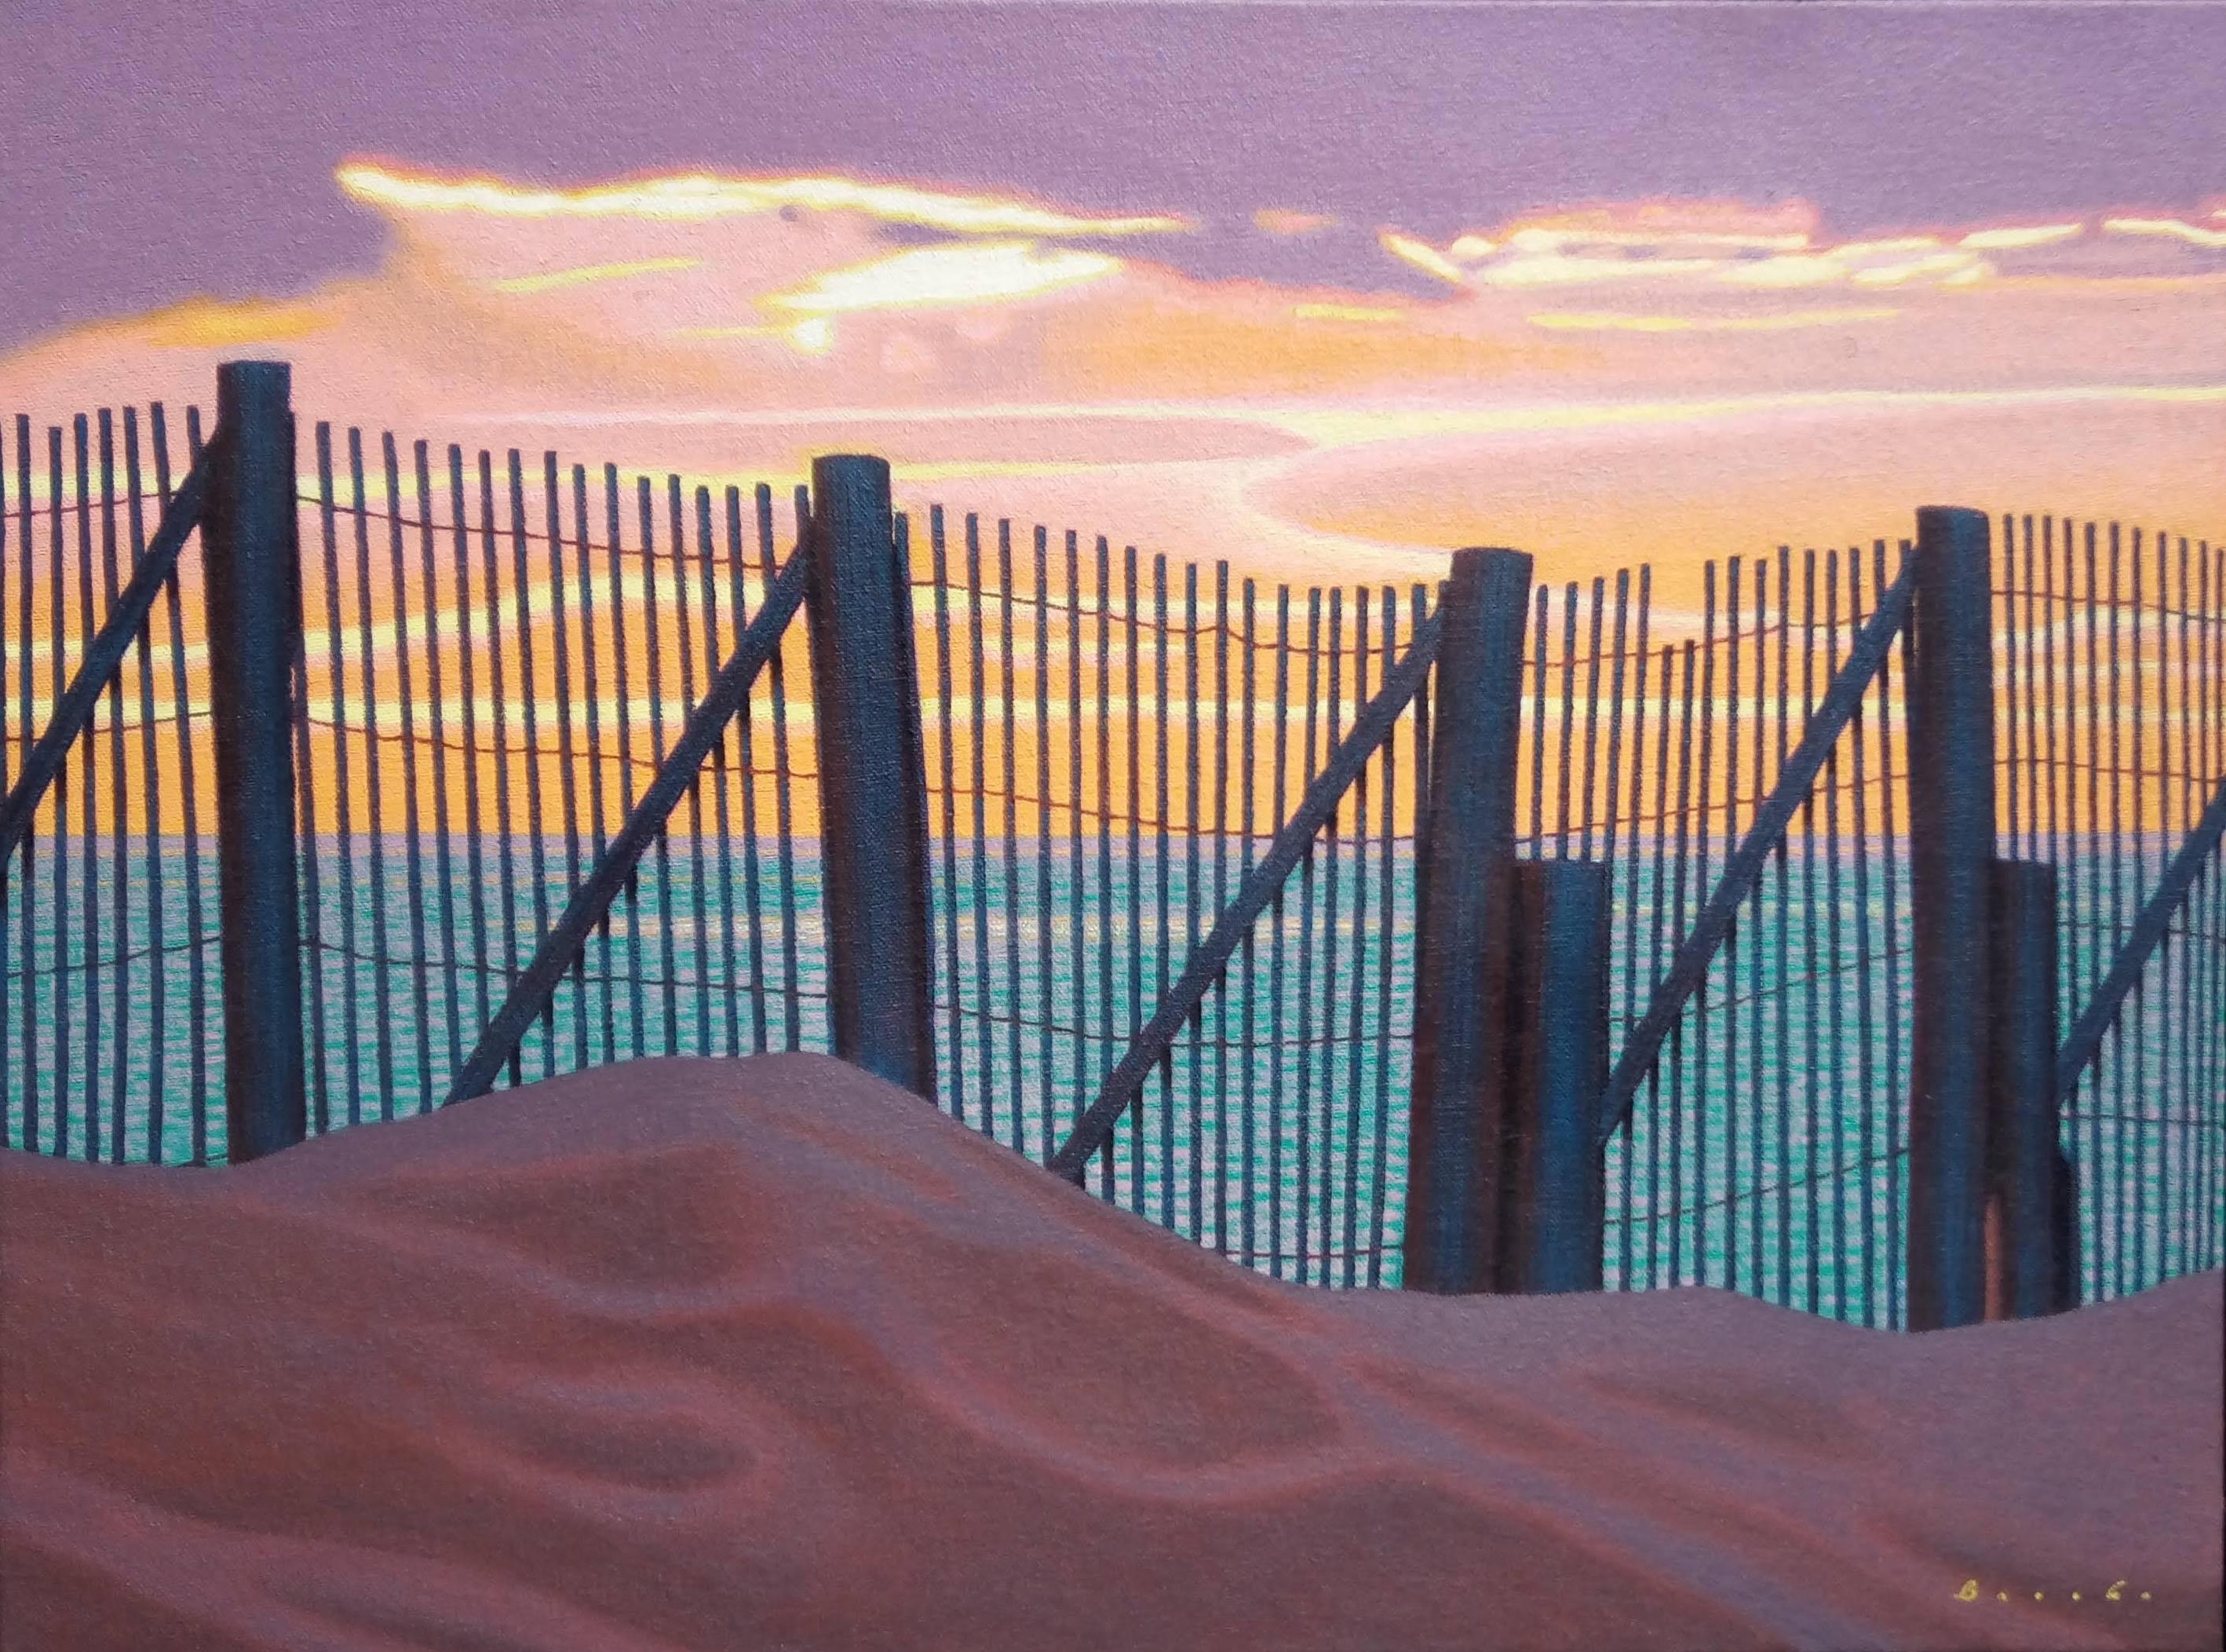 Rob Brooks Landscape Painting - "Sunset Fence" Silhouette of a Fence on the Beach with Dramatic Sunset Sky